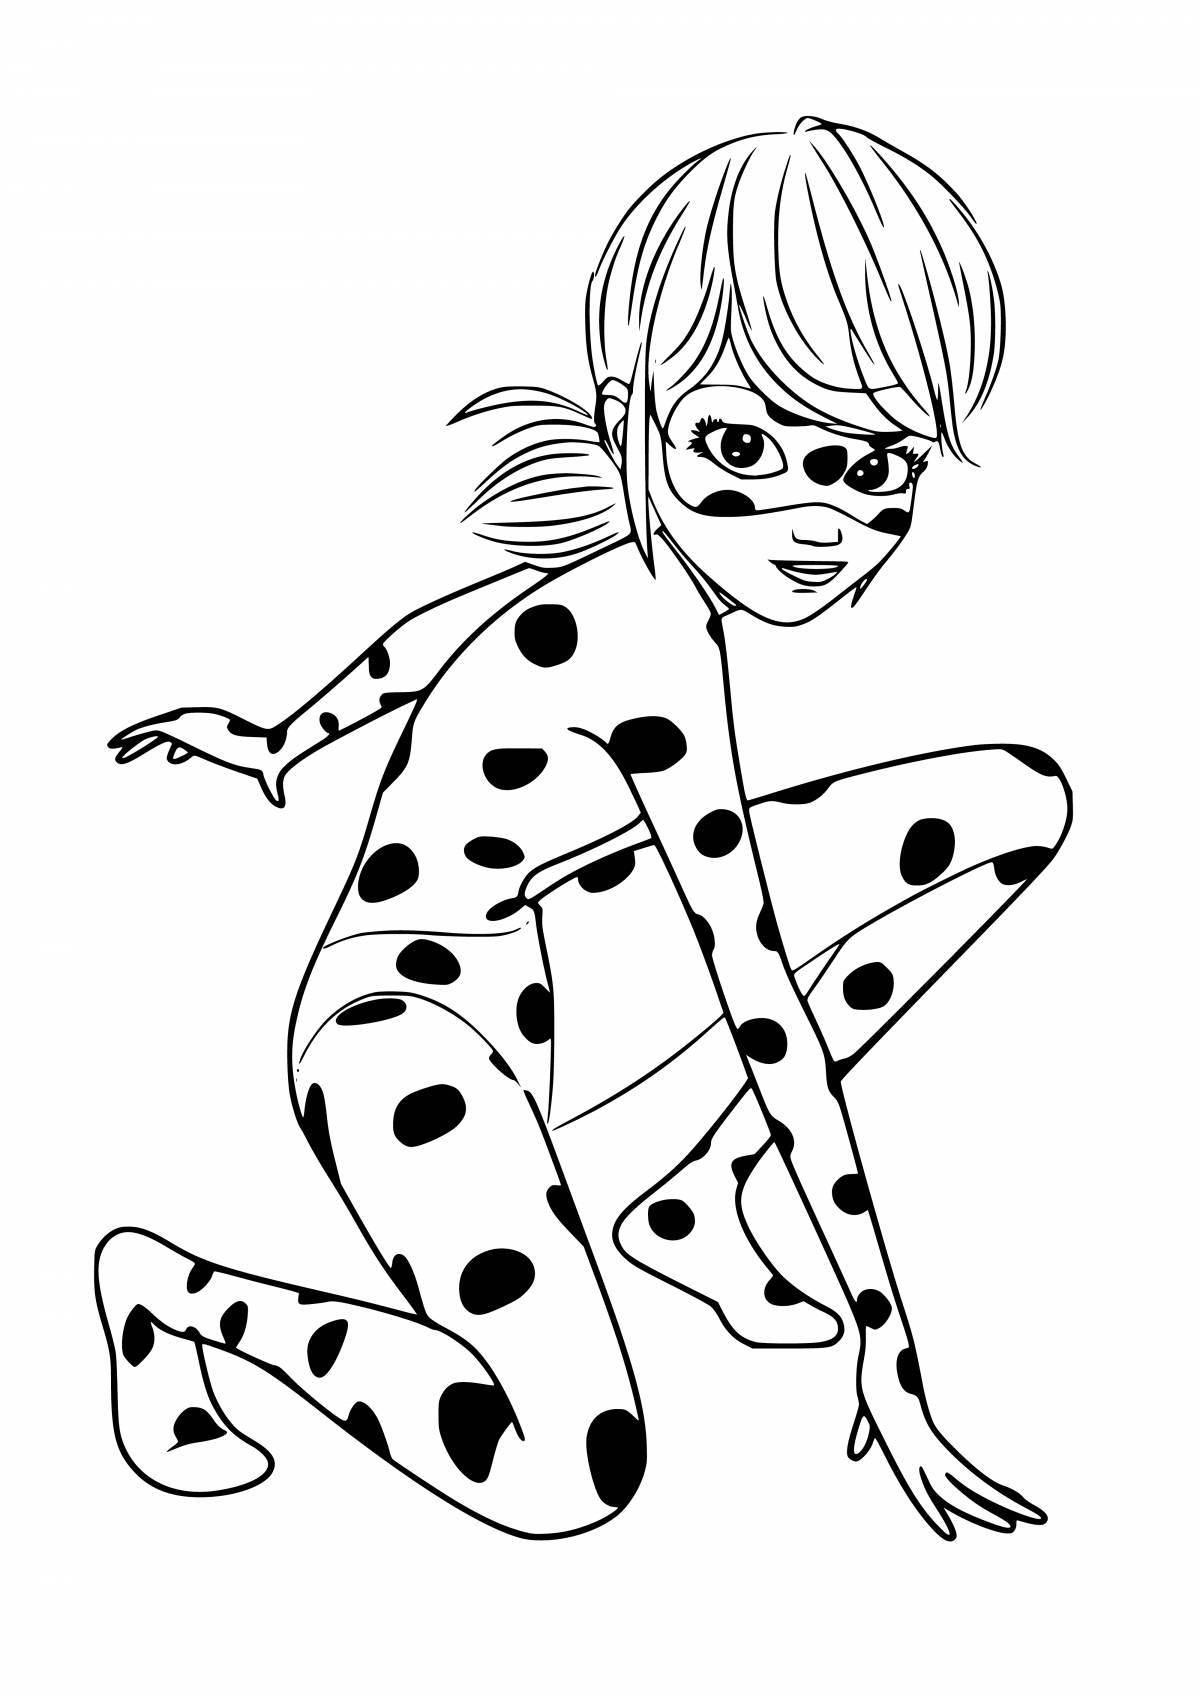 Colorful lady tank coloring page for 6-7 year olds